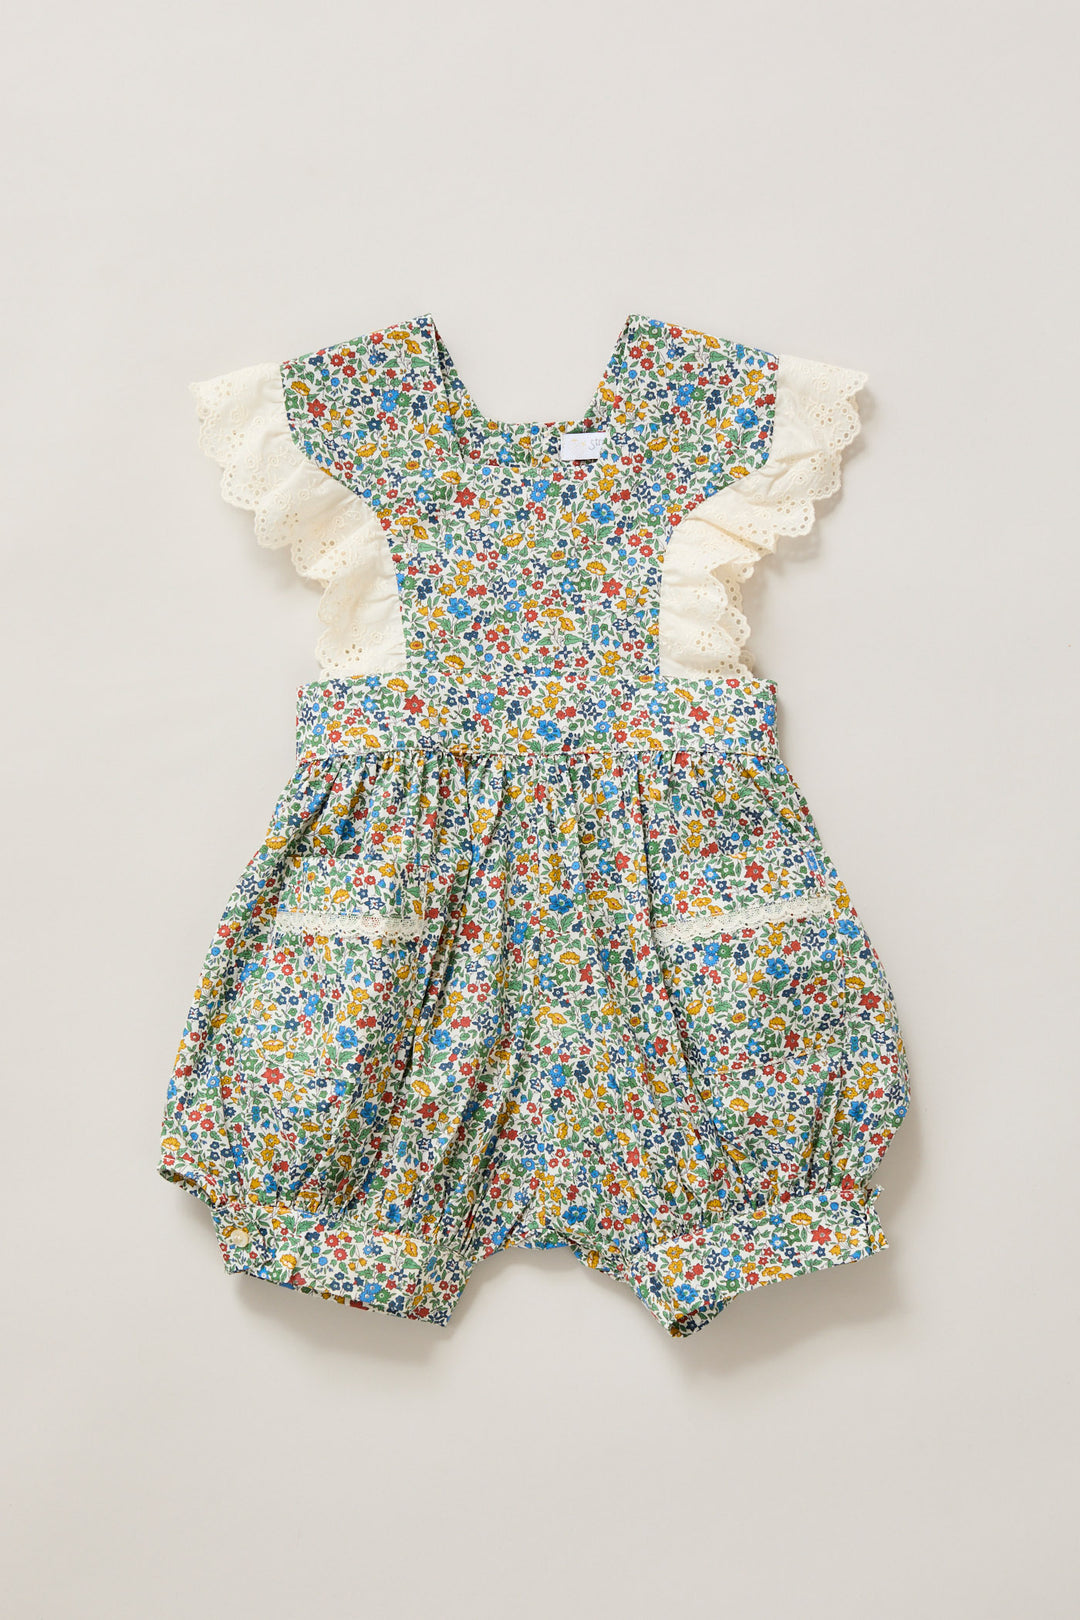 Baby Muffin Romper in Mustard Bluebell Liberty Print